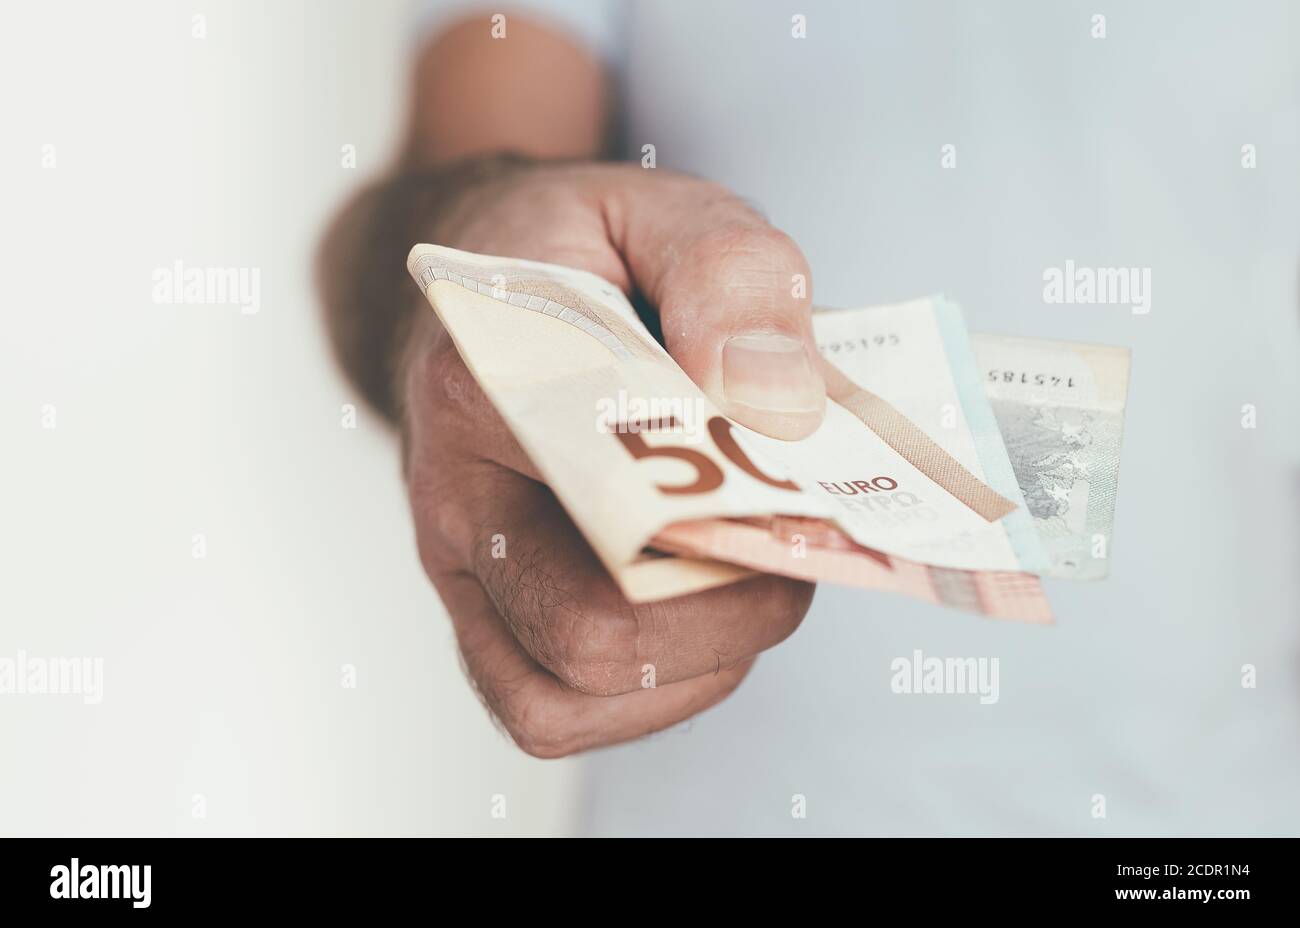 close-up of hand of caucasian man offering or handing over money to someone else Stock Photo